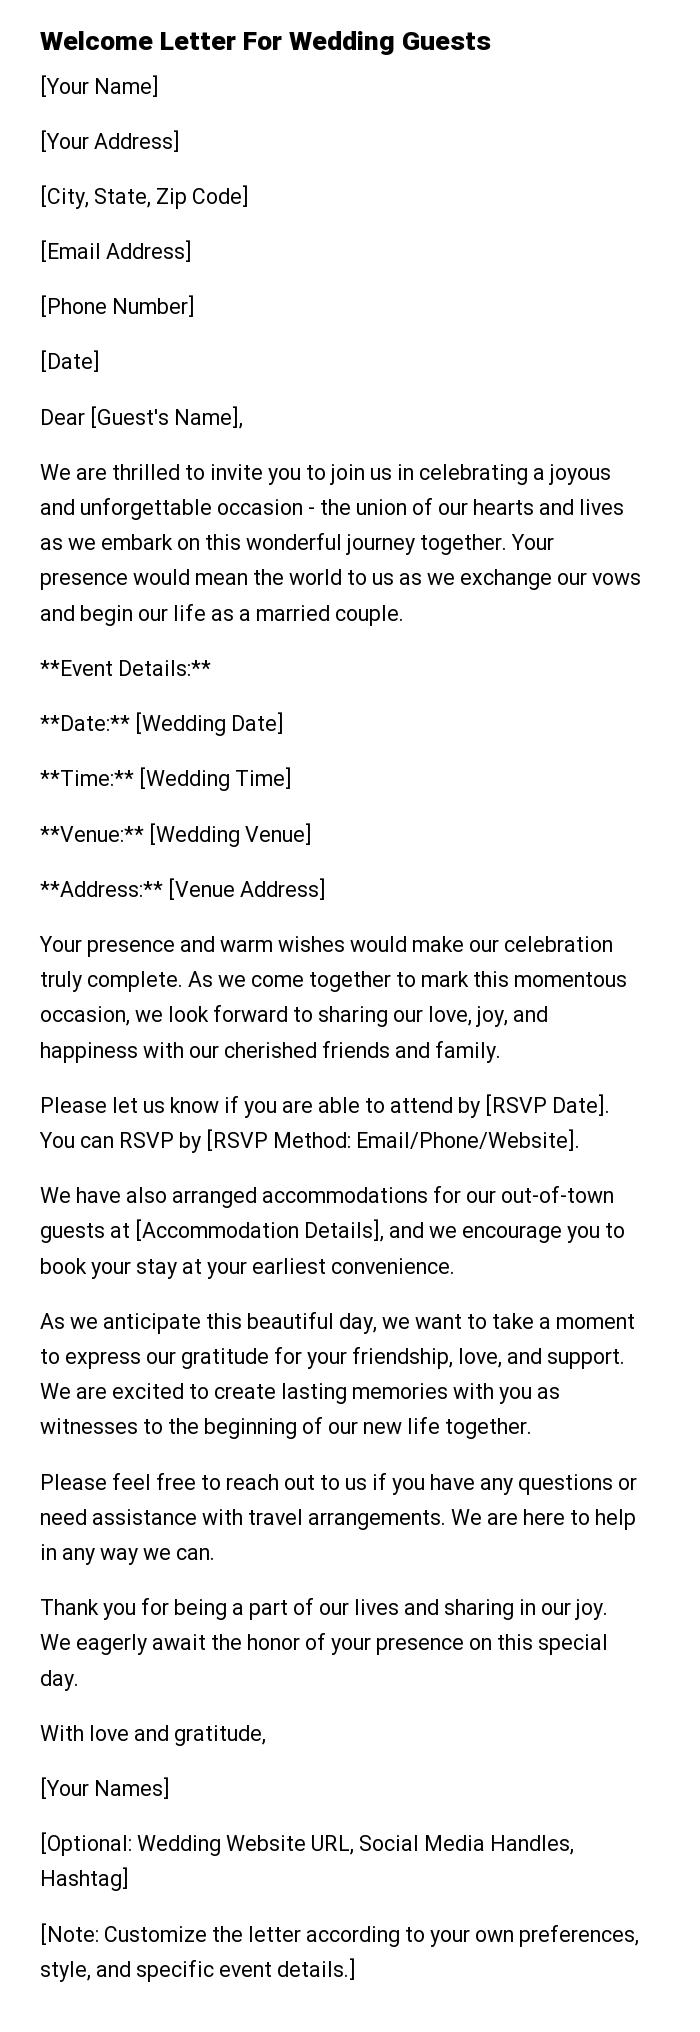 Welcome Letter For Wedding Guests